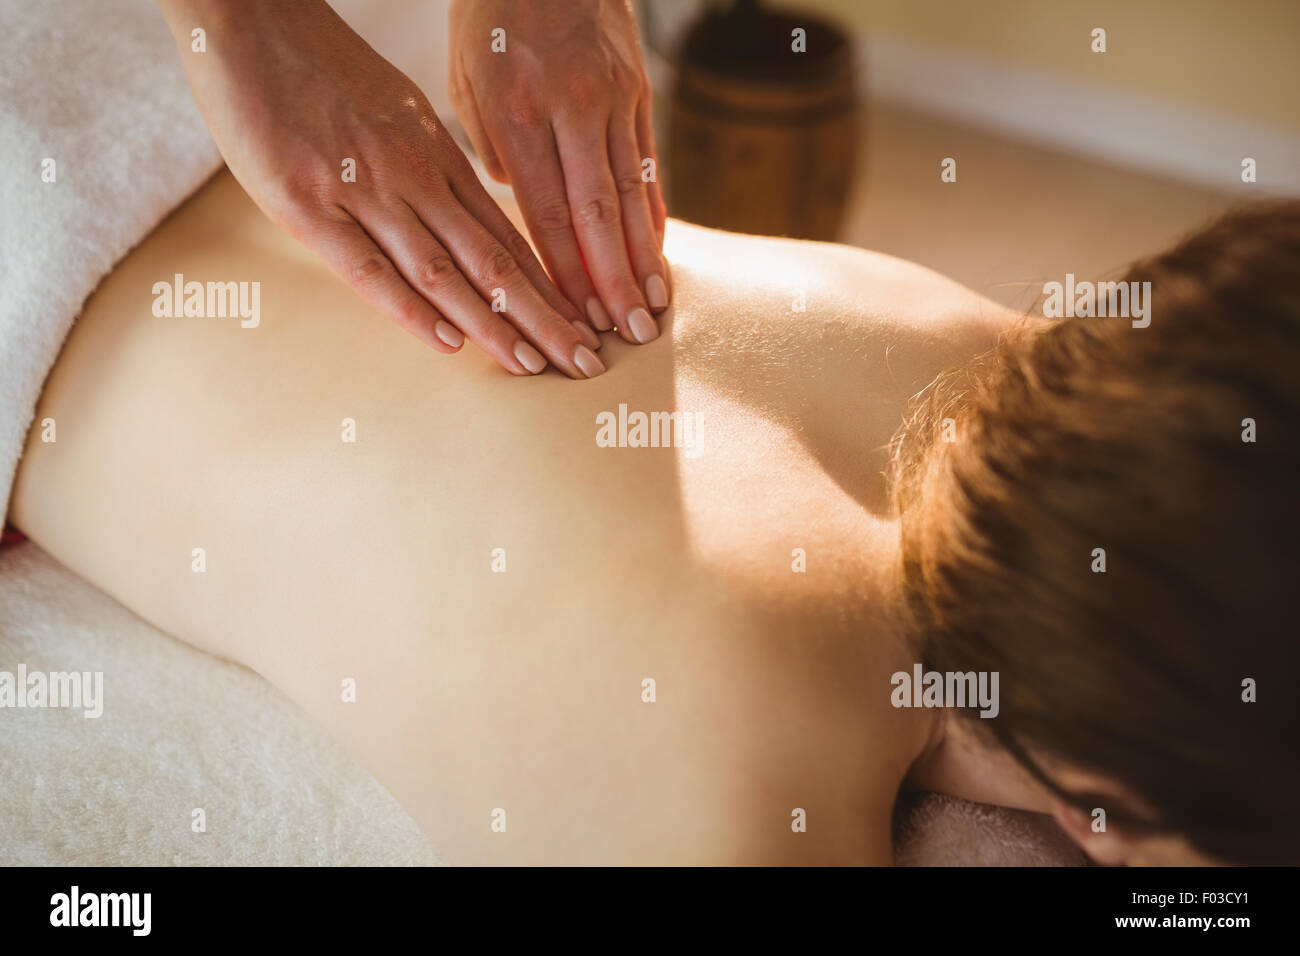 Young woman getting a massage Banque D'Images